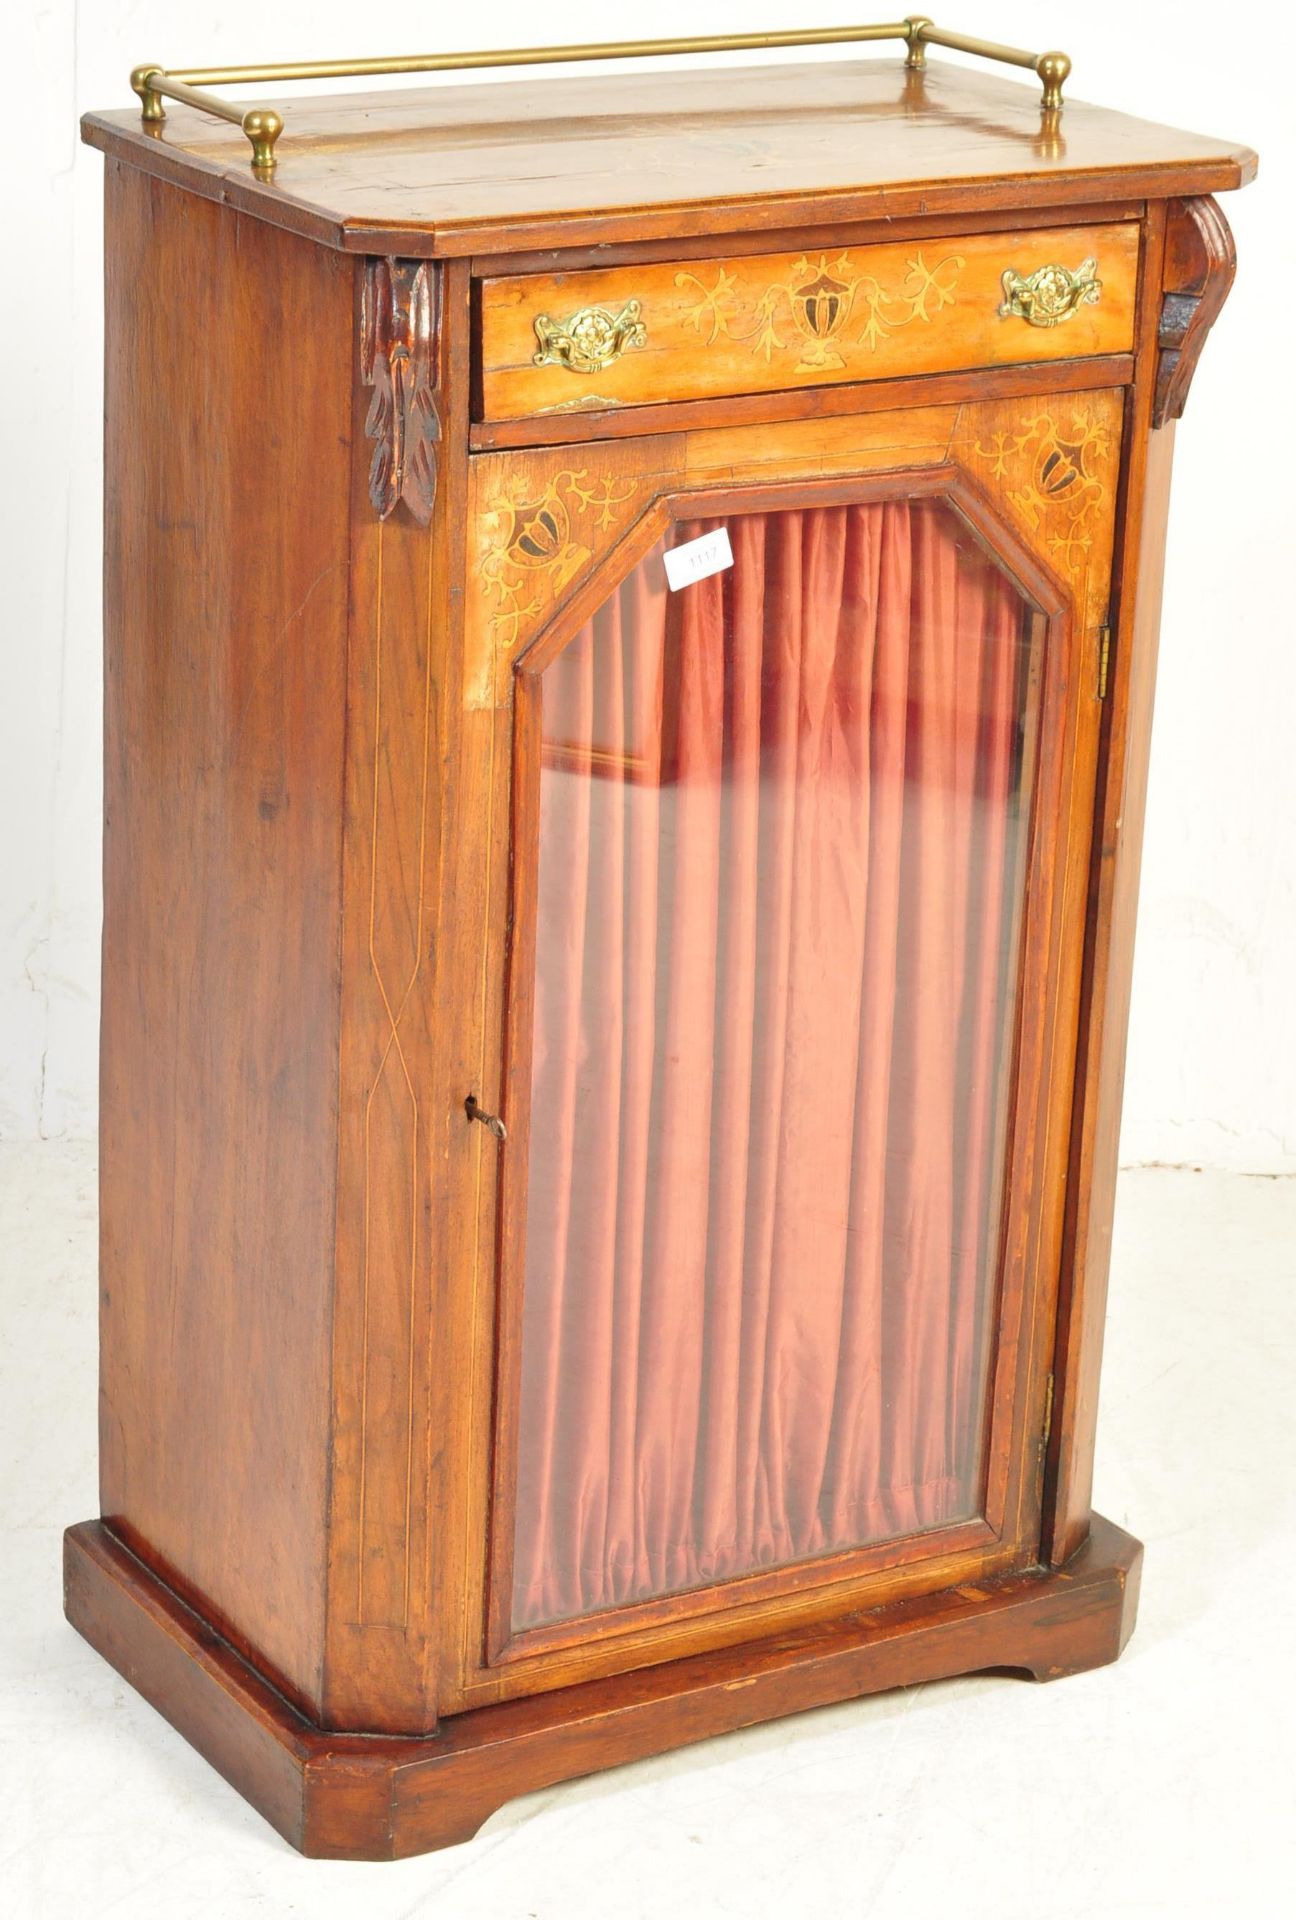 LATE 19TH CENTURY MARQUETRY INLAID PEDESTAL MUSIC CABINET - Image 2 of 10